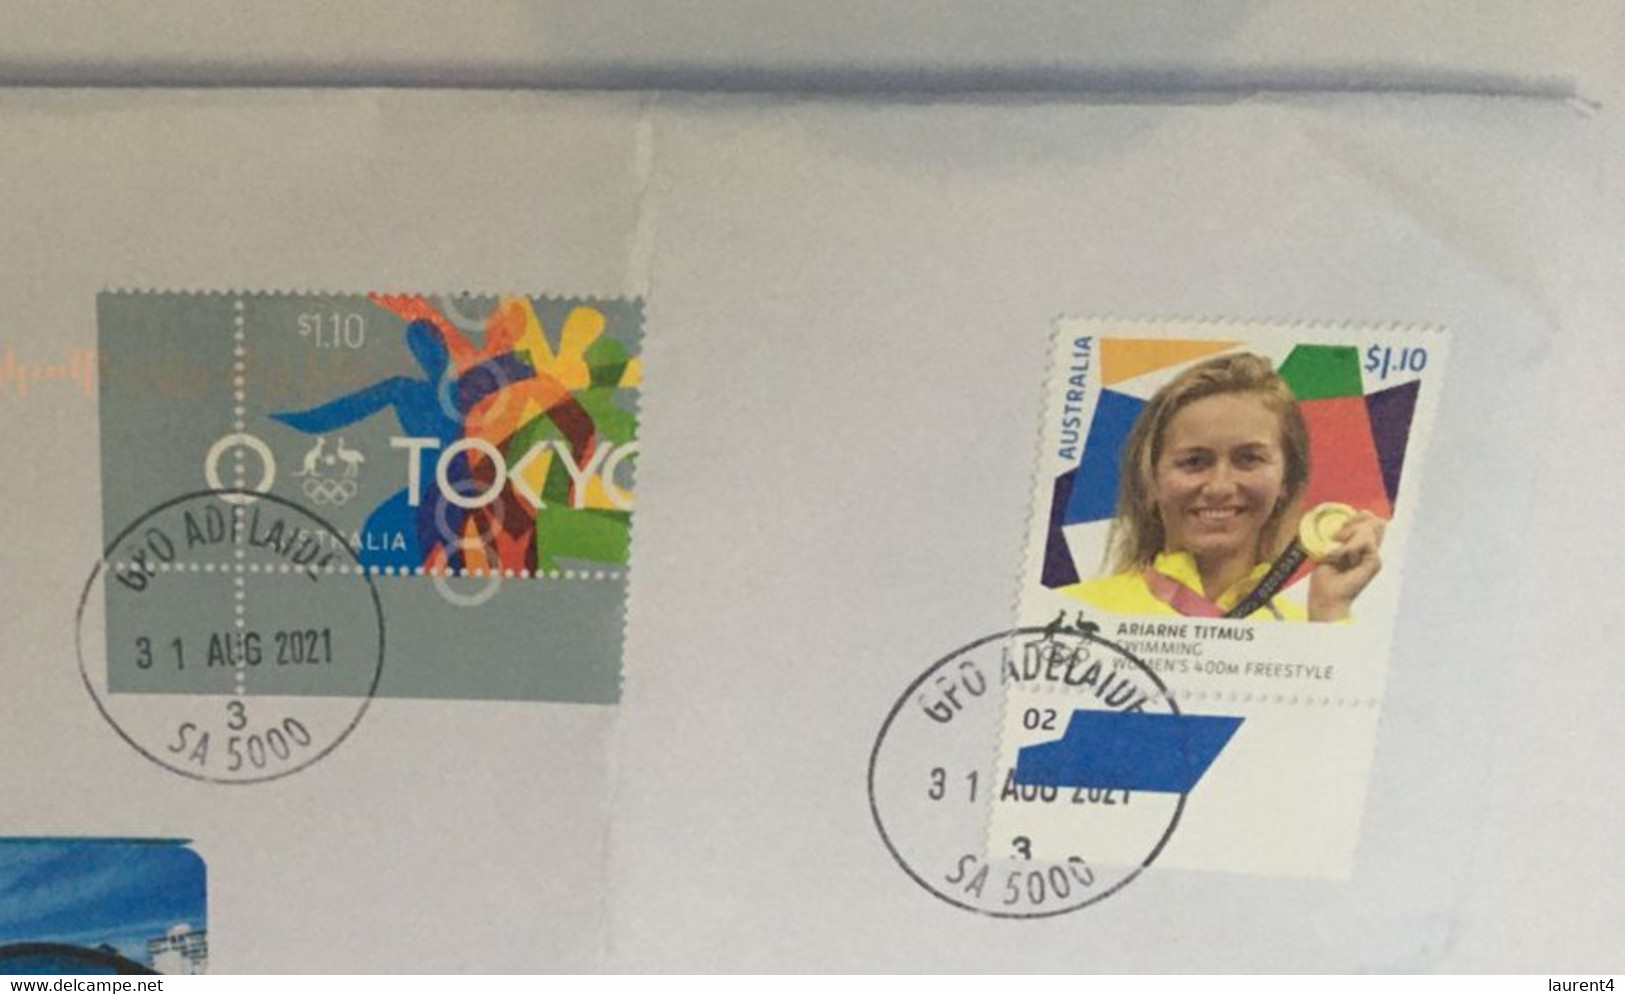 (2 A 19) Australia Gold Medalist & Tokyo Olympic On Large Cover + COVID-19 Stay Safe Adelaide + WHO Sign - Summer 2020: Tokyo